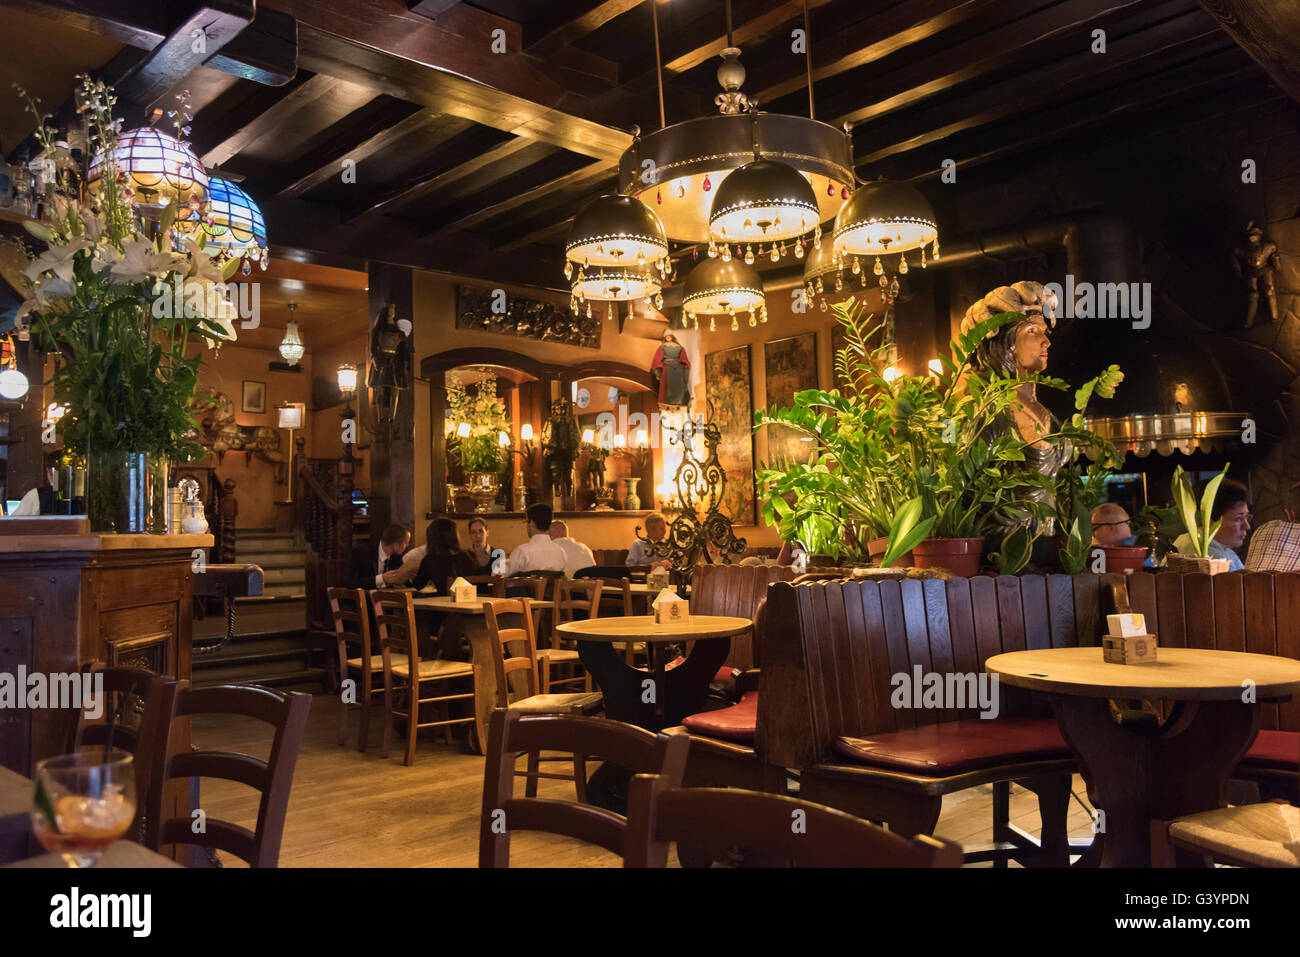 La Chaloupe d’or brasserie interior Grand Place Brussels Belgium Stock Photo